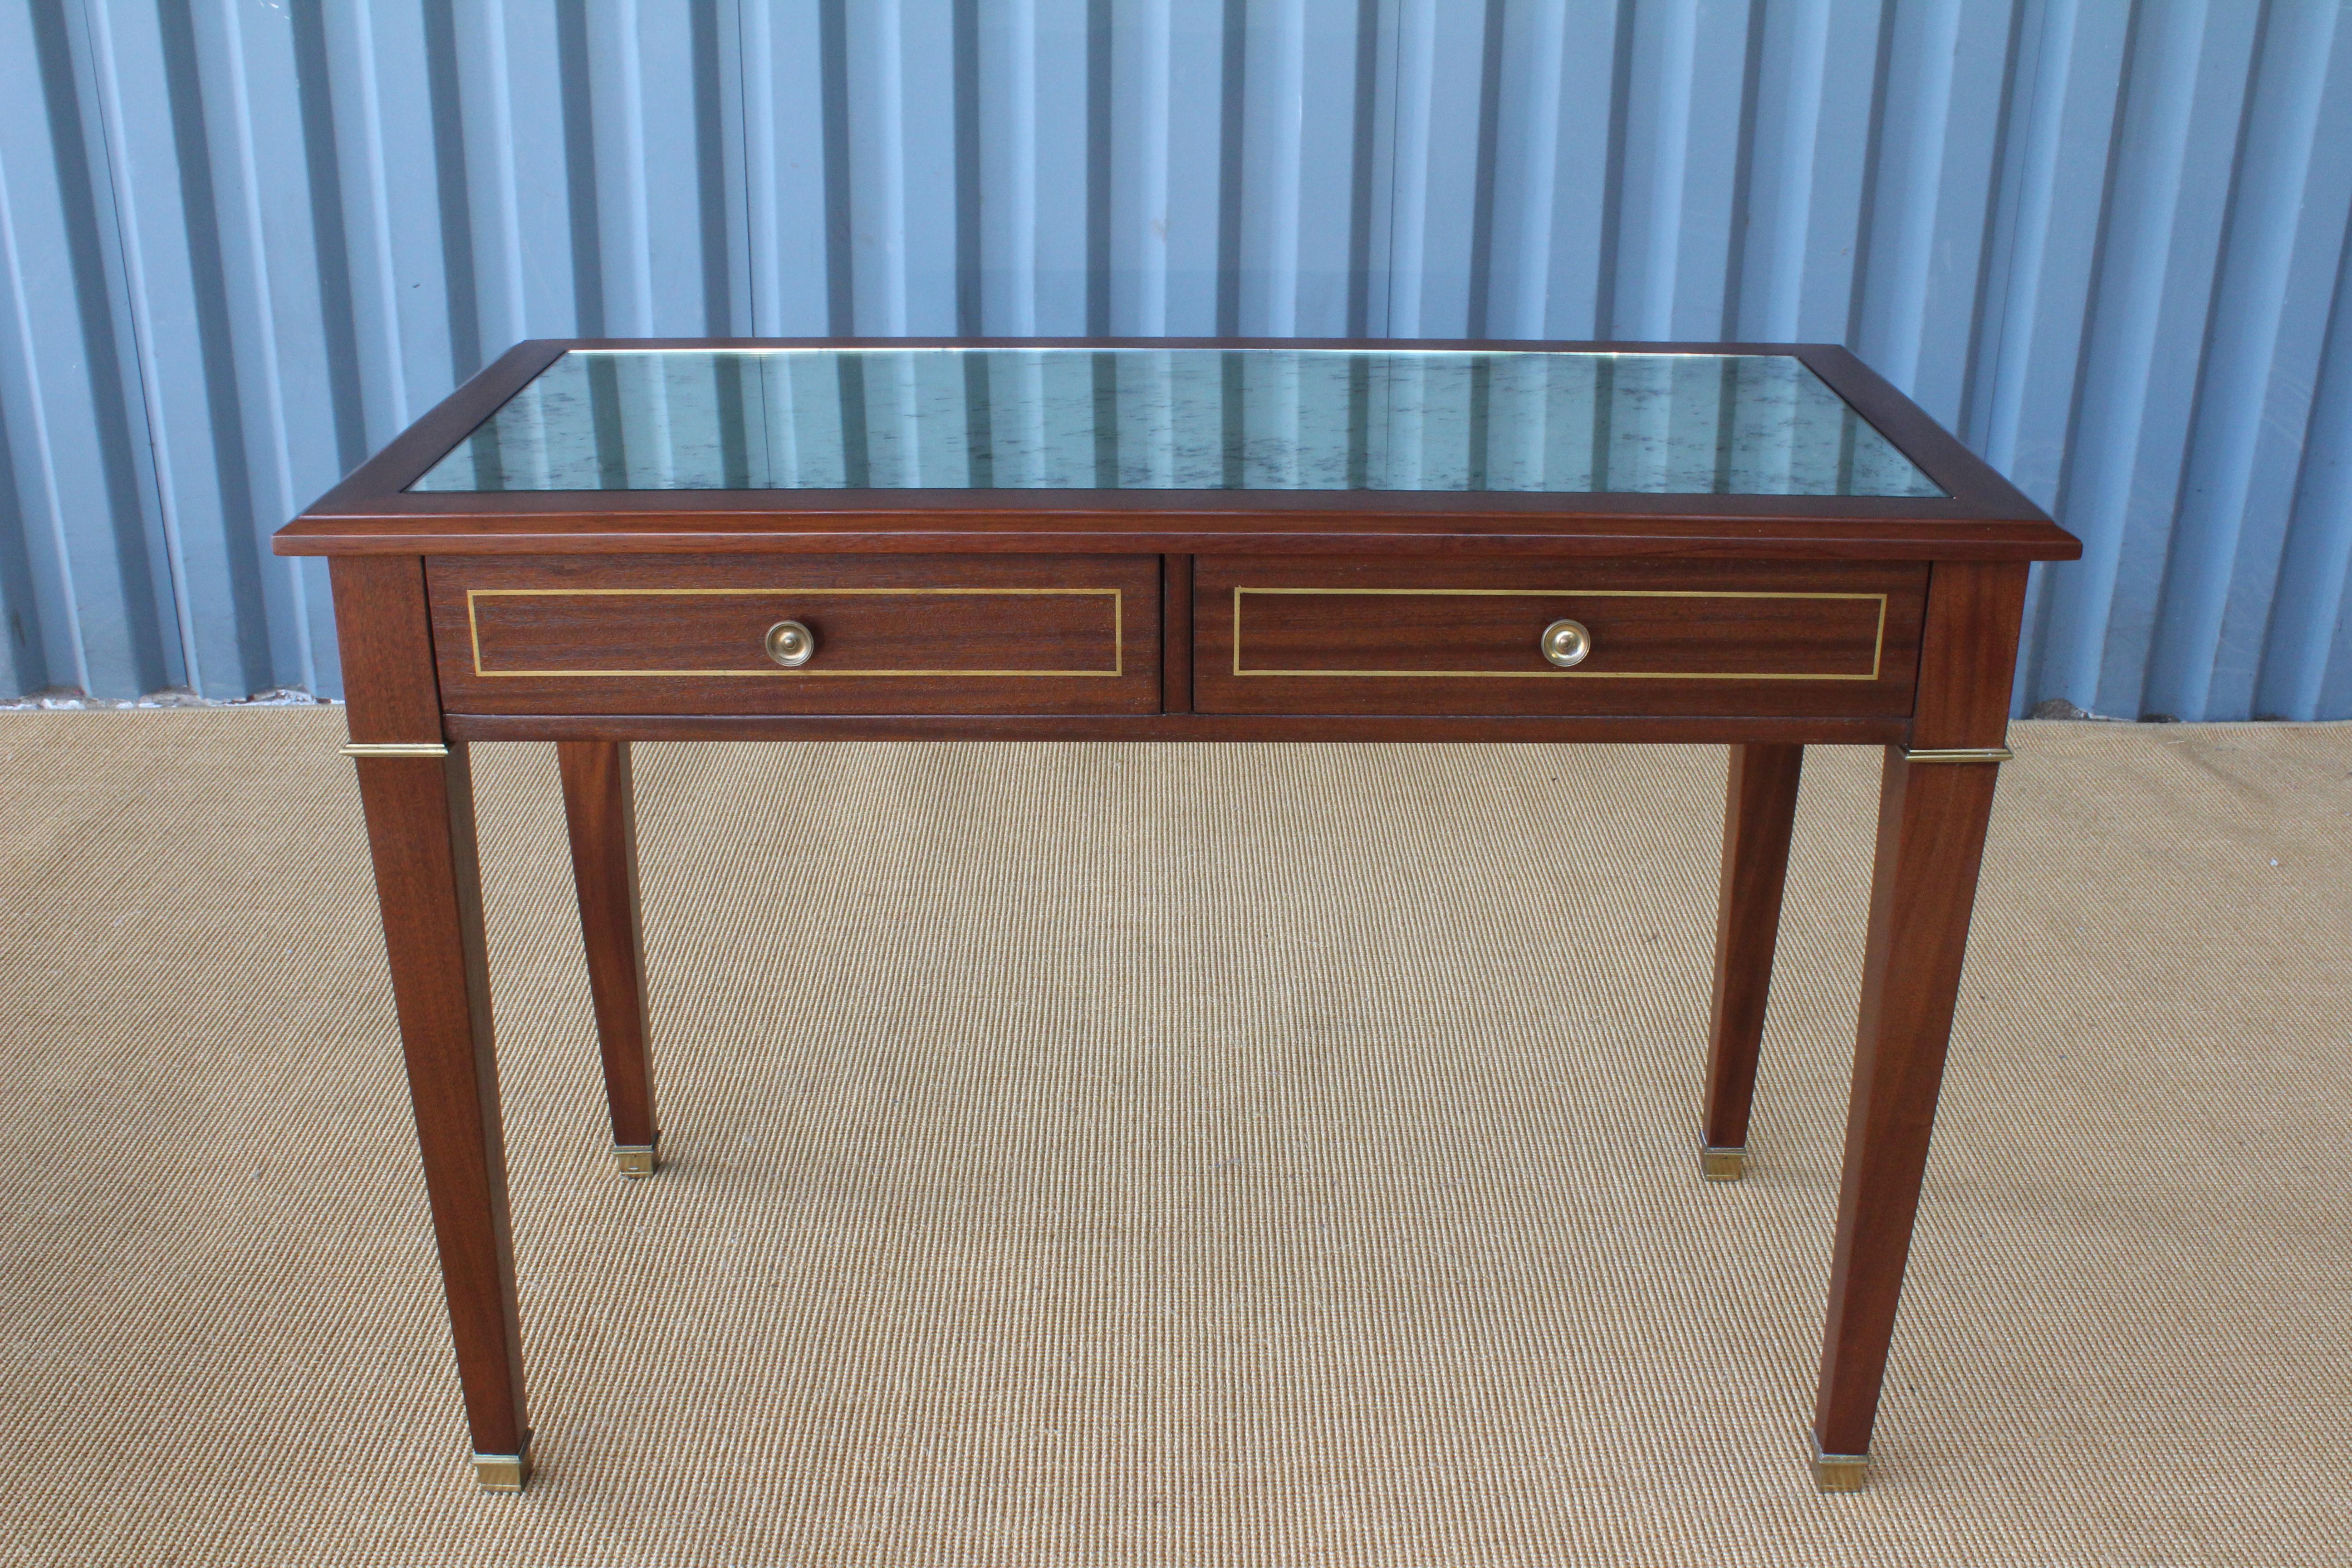 1950s mahogany jeweler's desk. Perfect use for a console table. Finished on all sides. Features brass accents, two drawers, and an antique mirror top. 
Recently refinished.